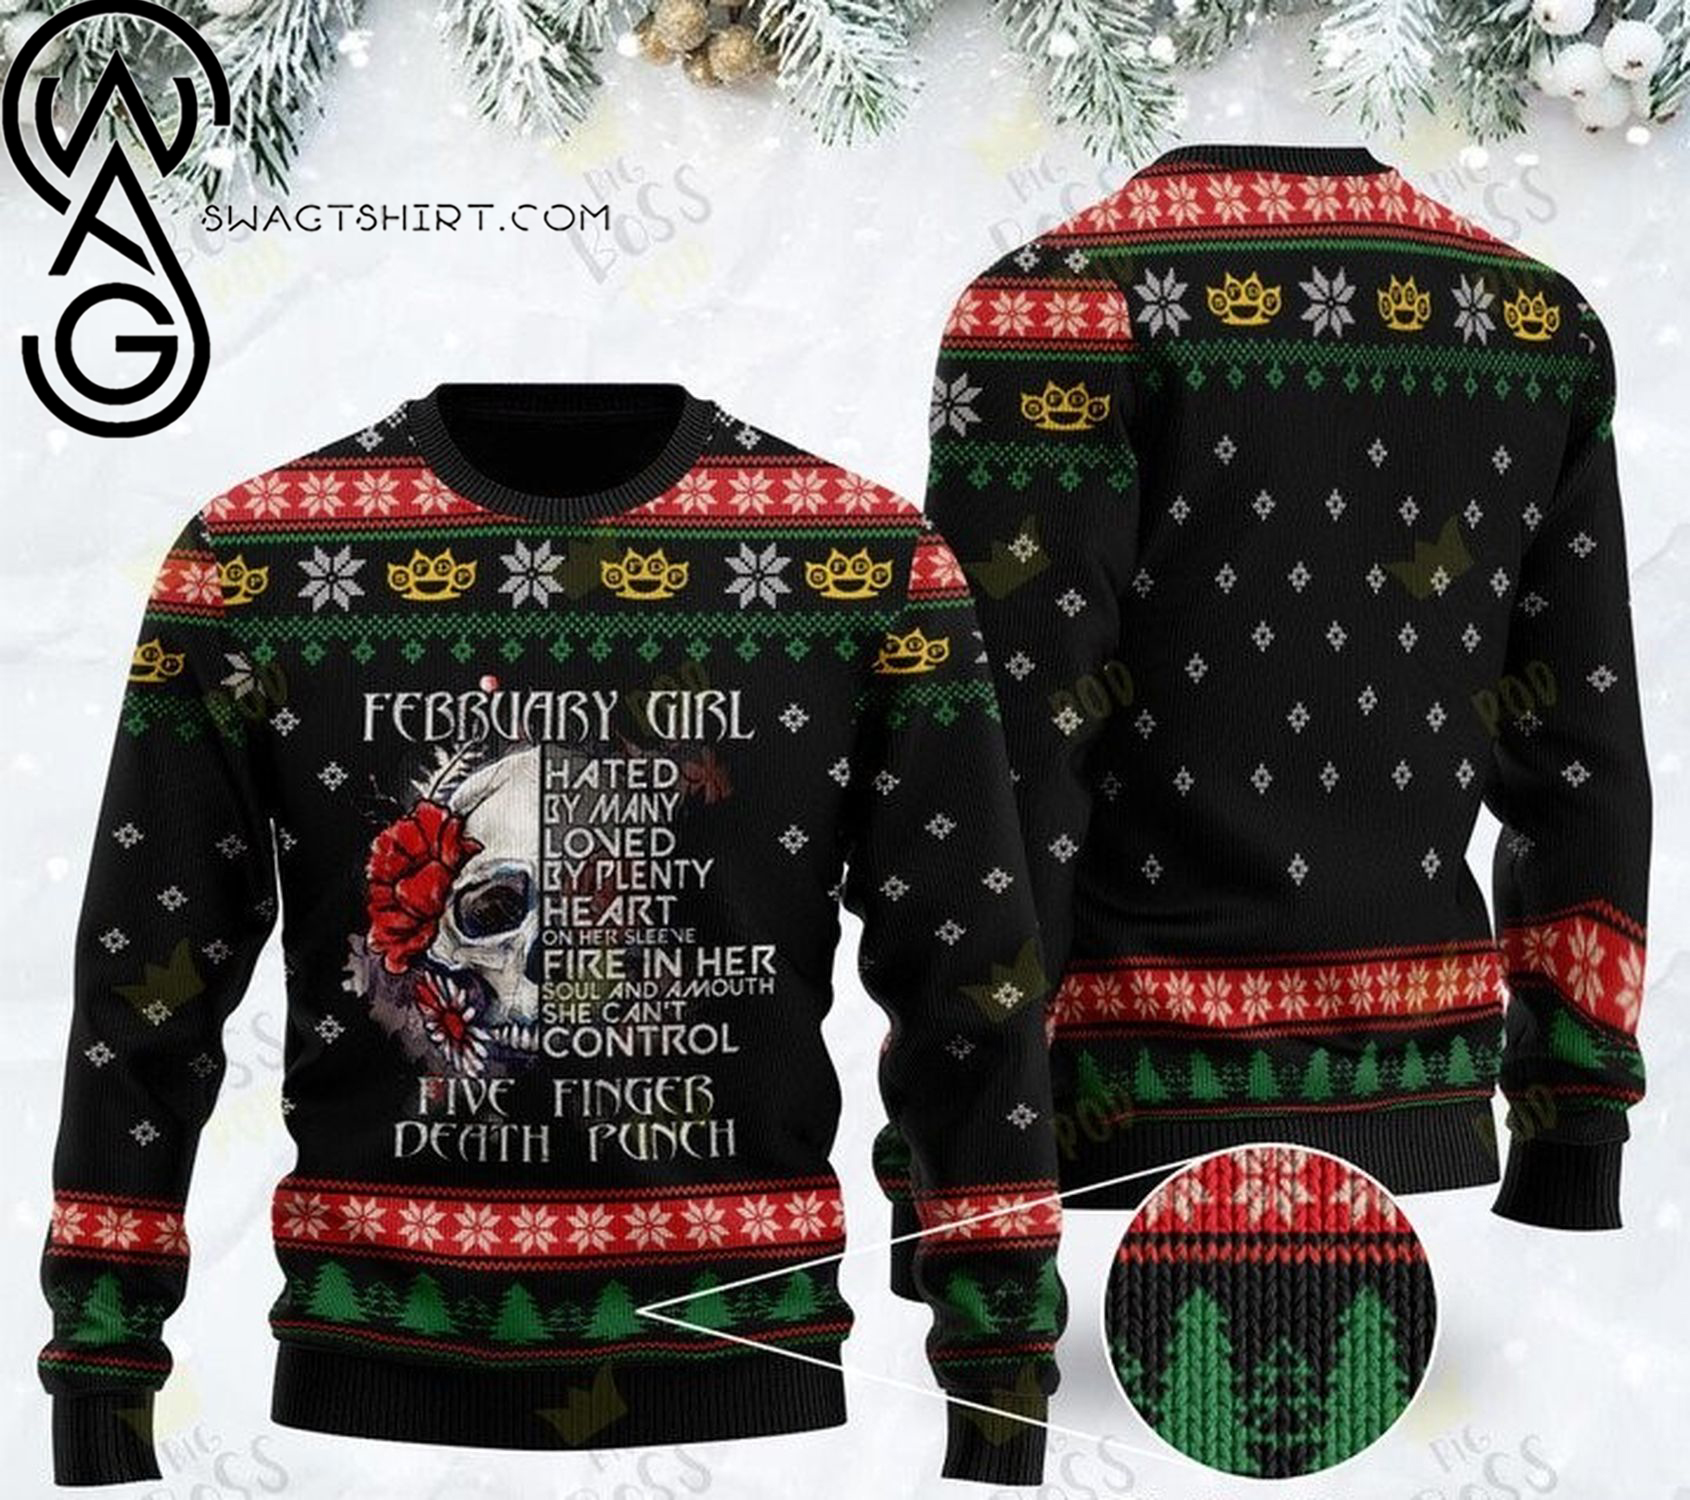 February girl five finger death punch ugly christmas sweater